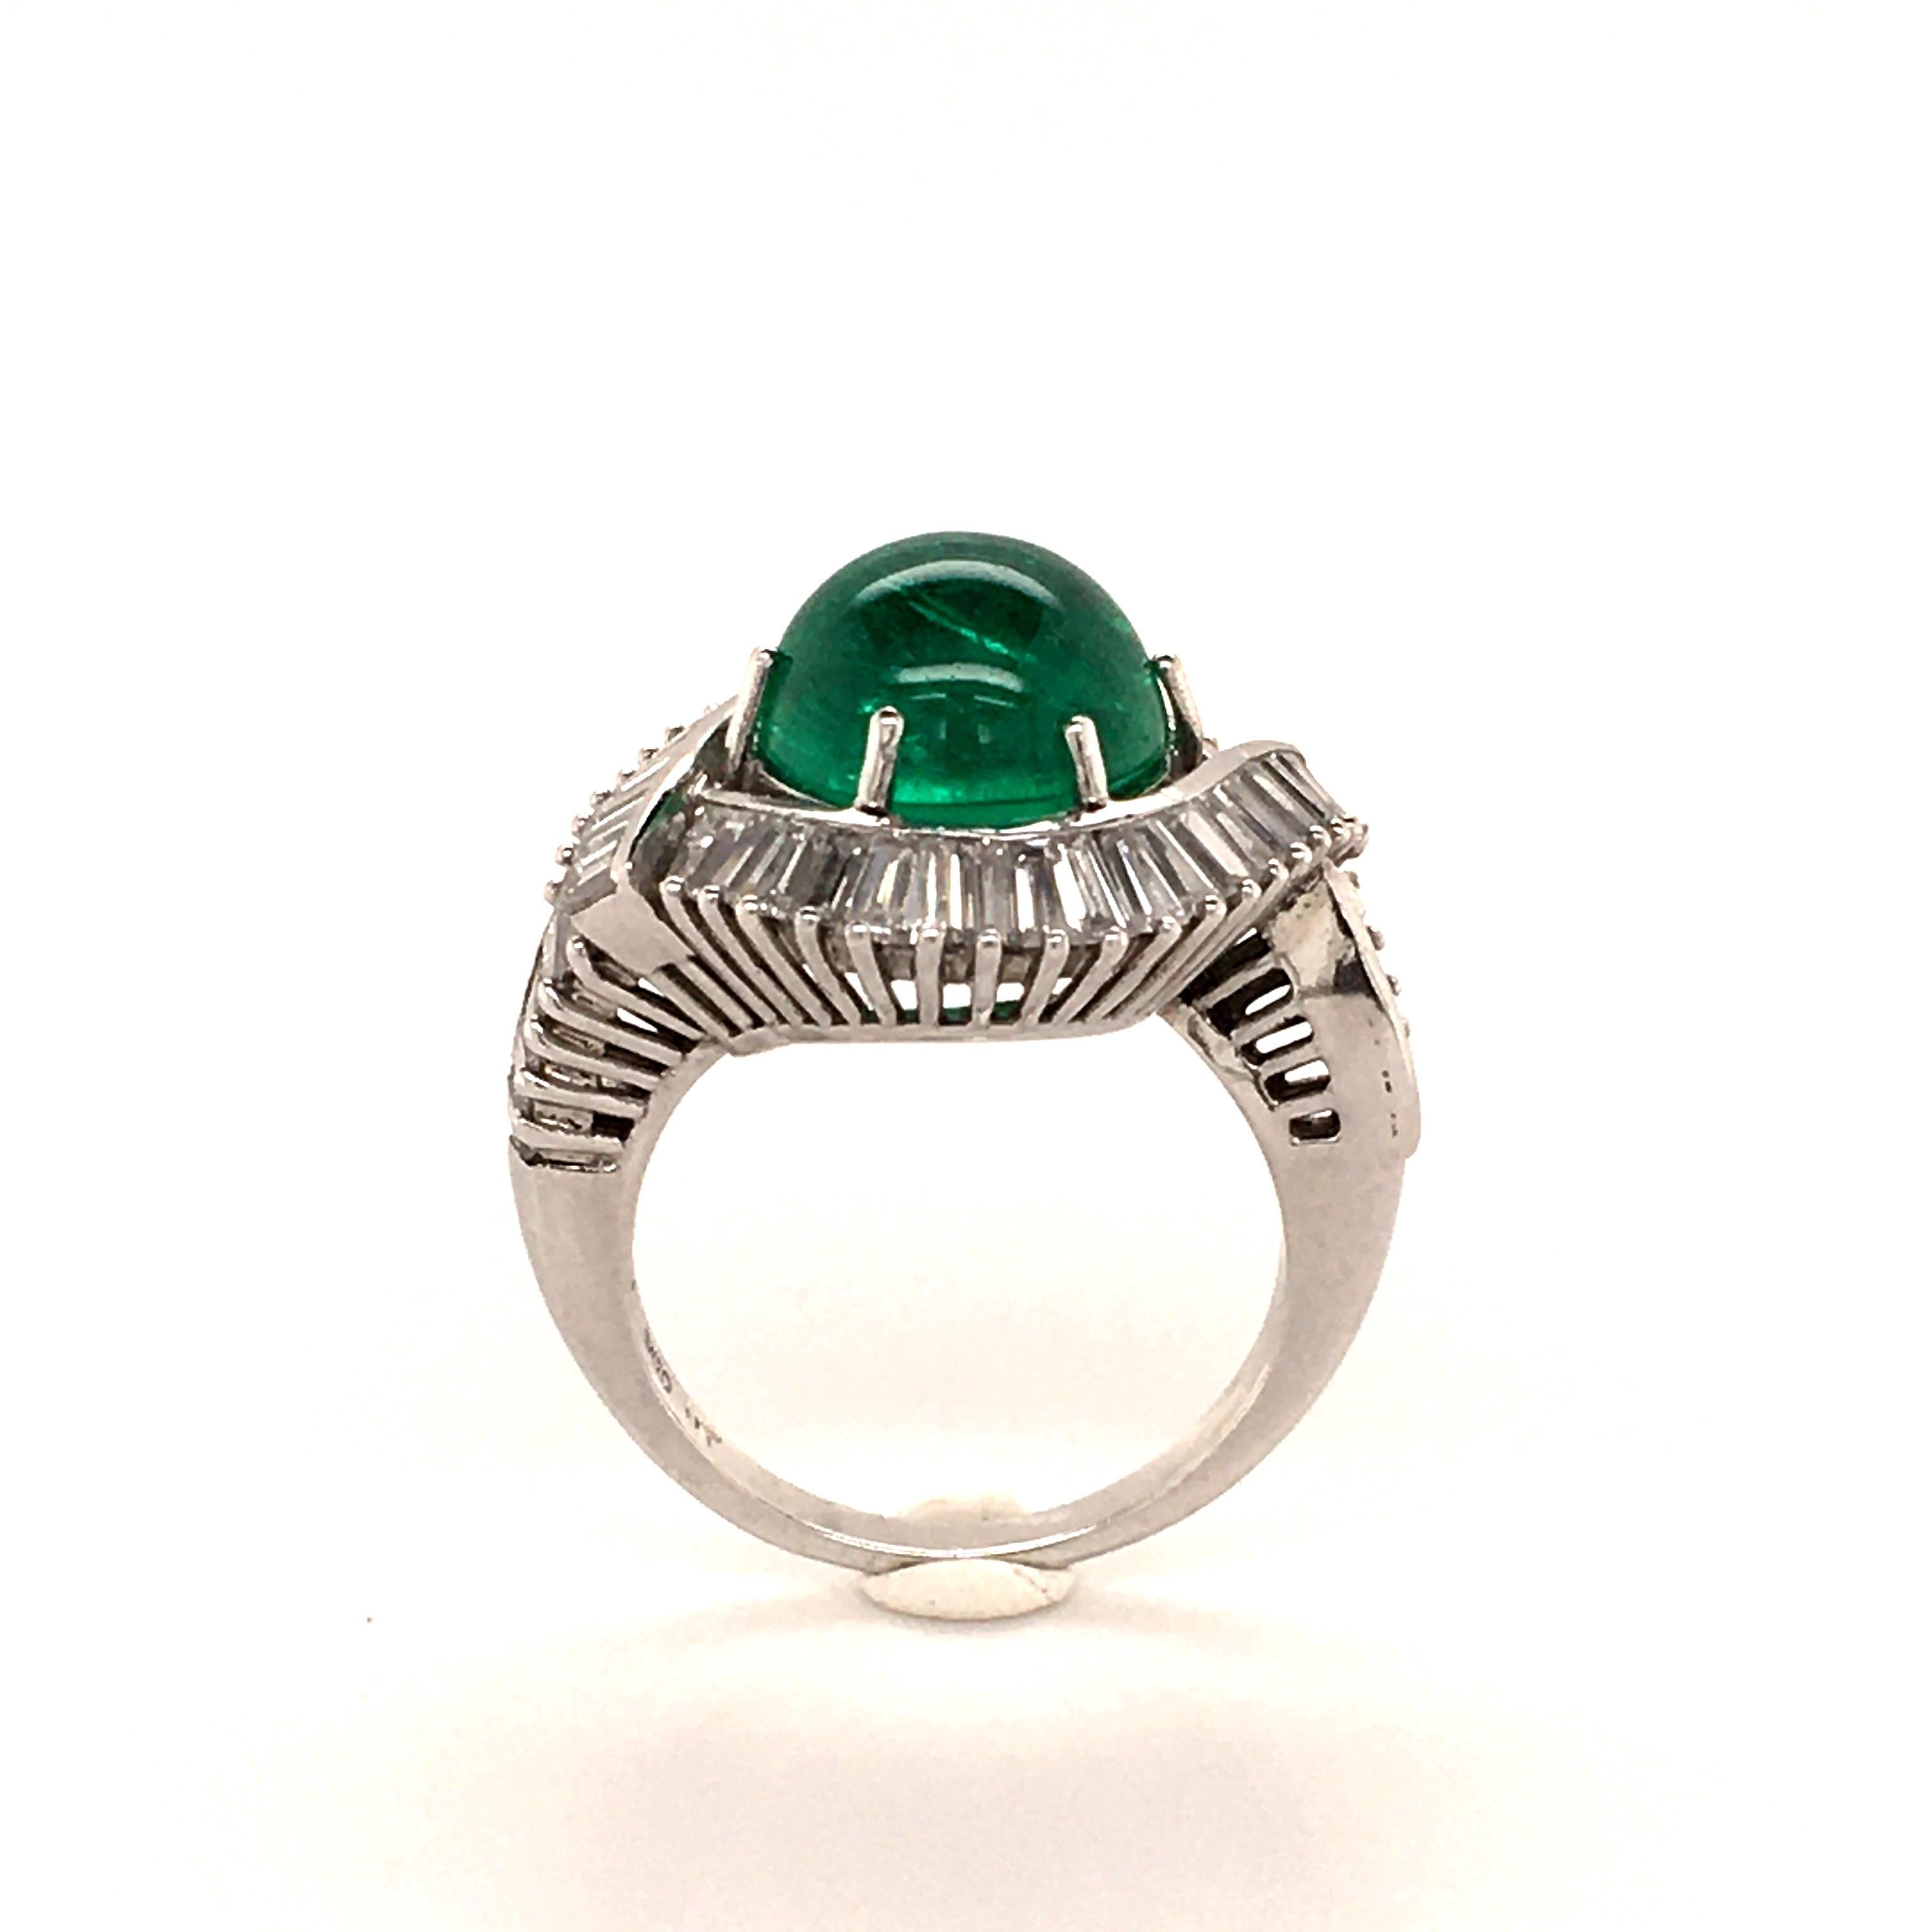 5.69 Carat Colombian Emerald and Diamond Ring in Platinum 950 For Sale 1